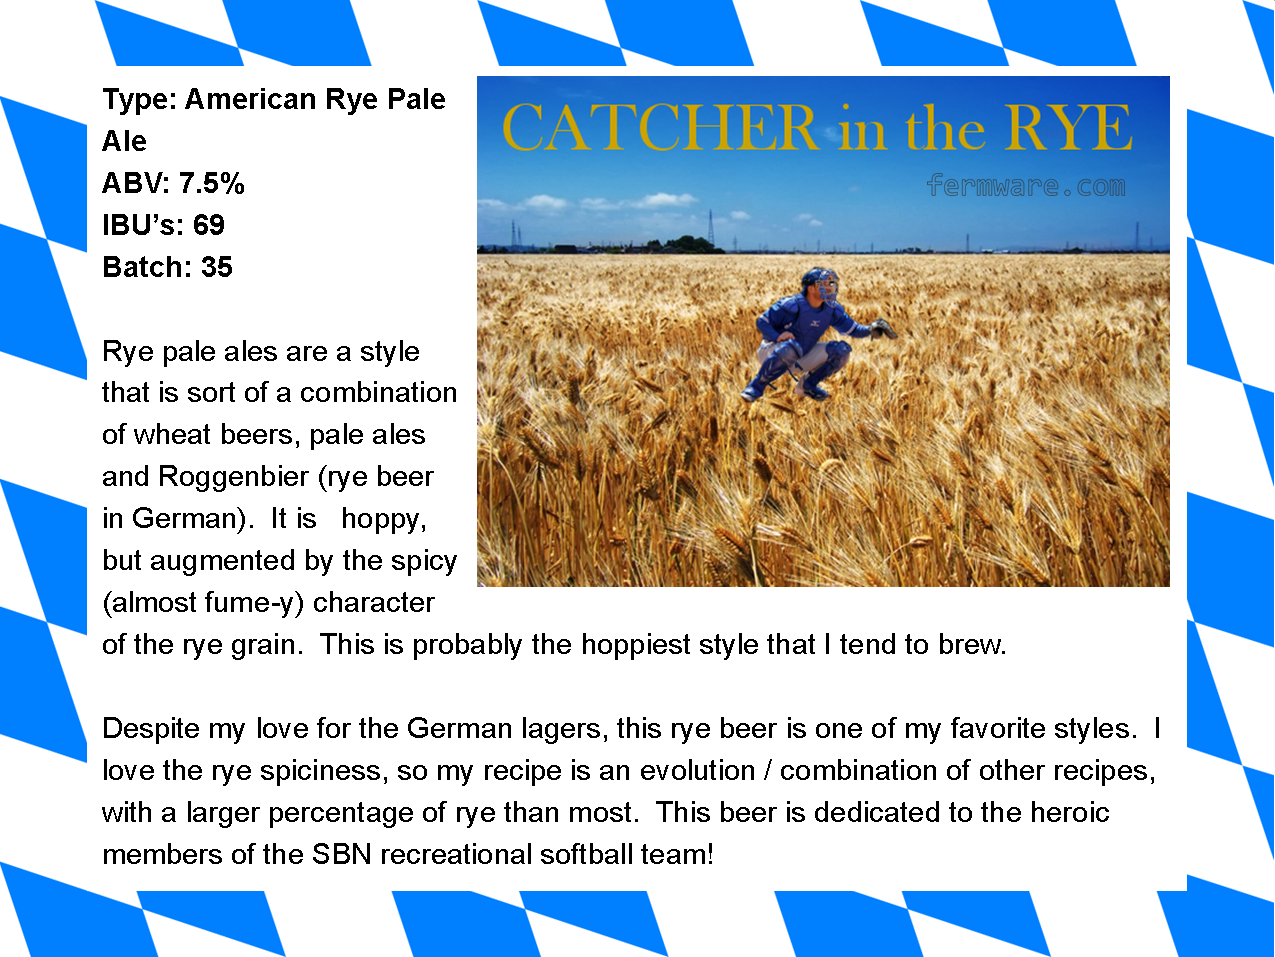 015-4-Catcher-in-the-Rye-label.png